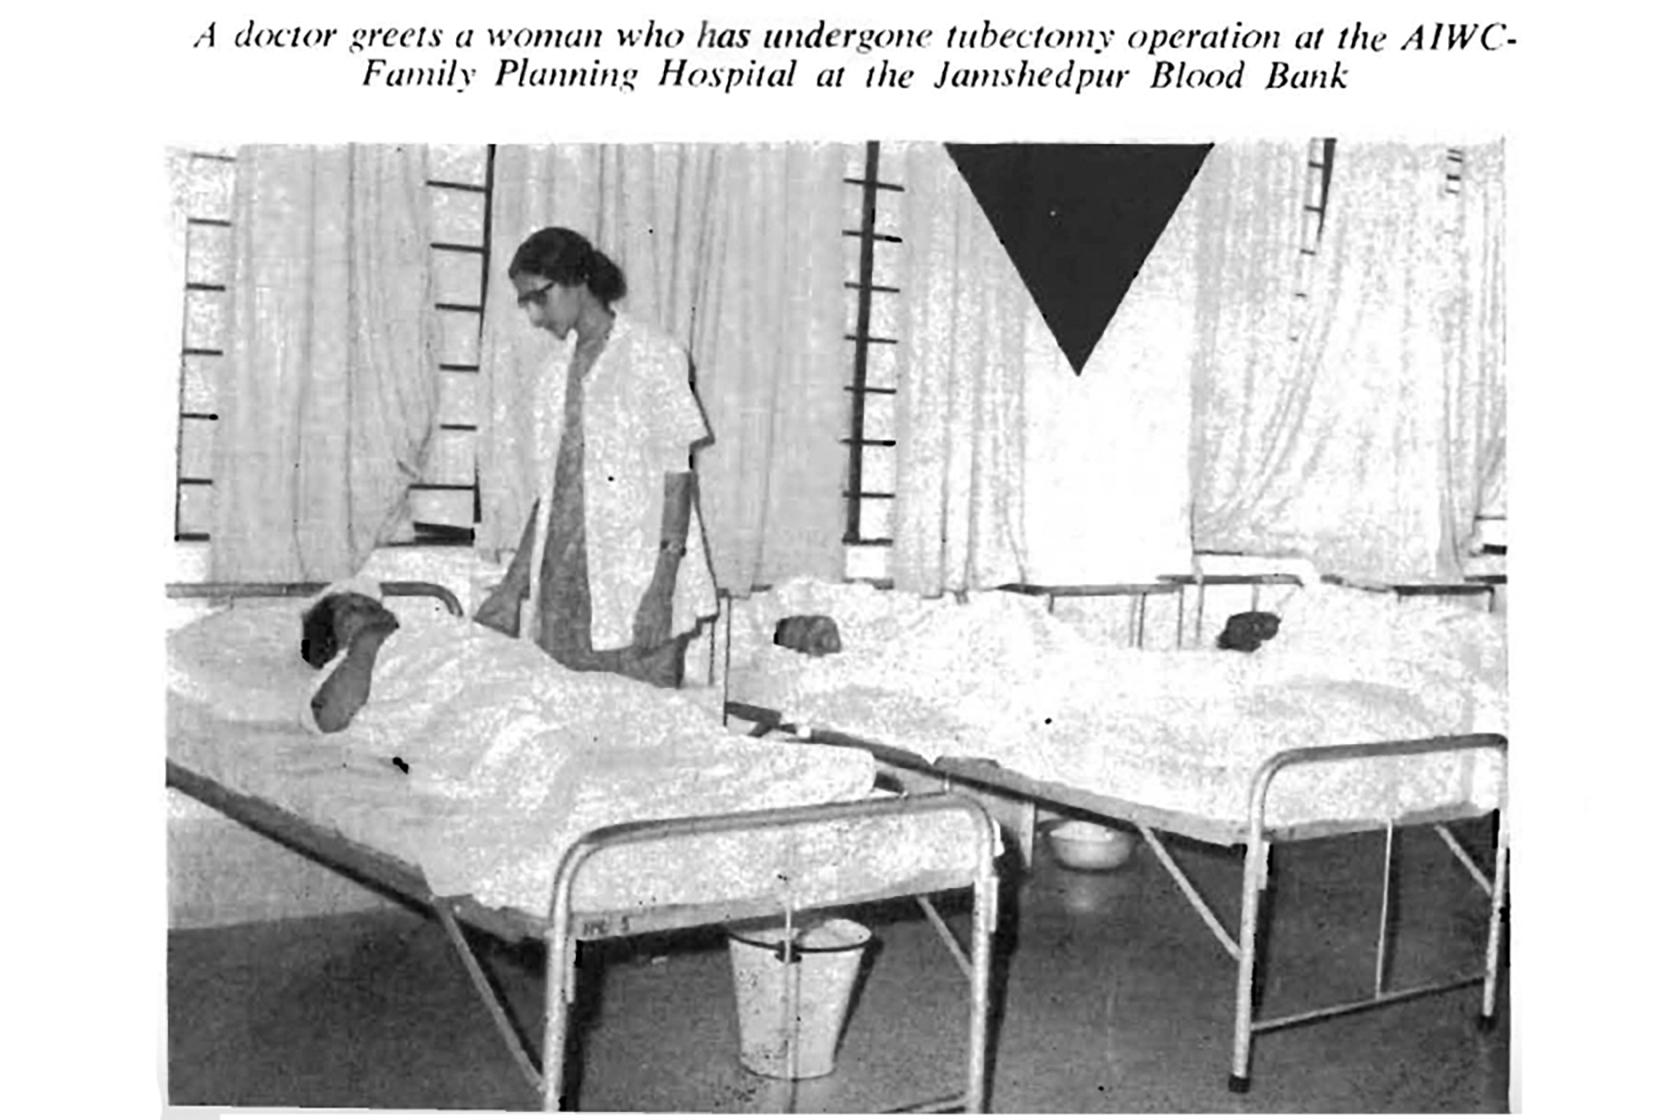 A black-and-white photograph from 1976 shows a female doctor leaning over the bed of a patient recovering from surgery. The image caption reads: 鈥淎 doctor greets a woman who has undergone tubectomy operation at the AIWC-Family Planning Hospital at the Jamshedpur Blood Bank.鈥�